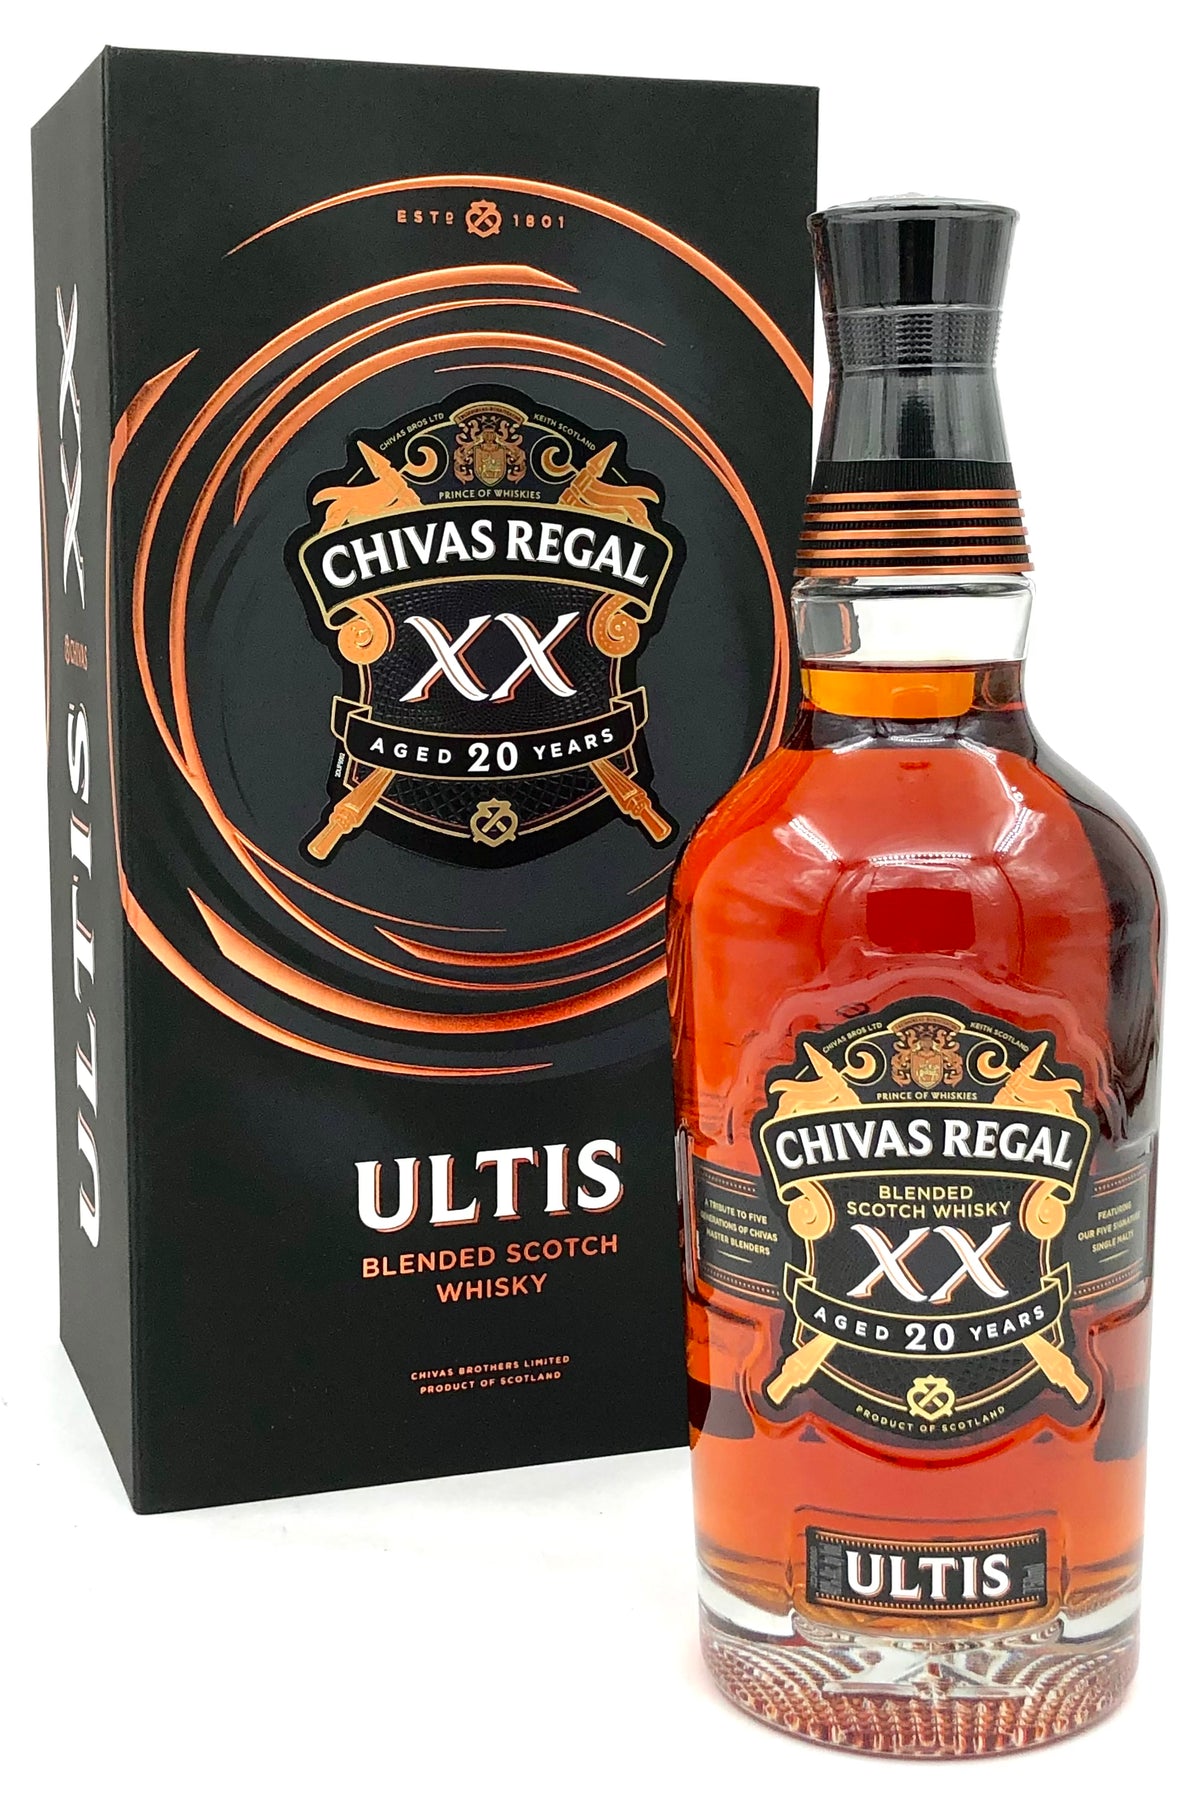 Buy Chivas Regal Ultis XX 20 Year Old Blended Scotch Whisky Online